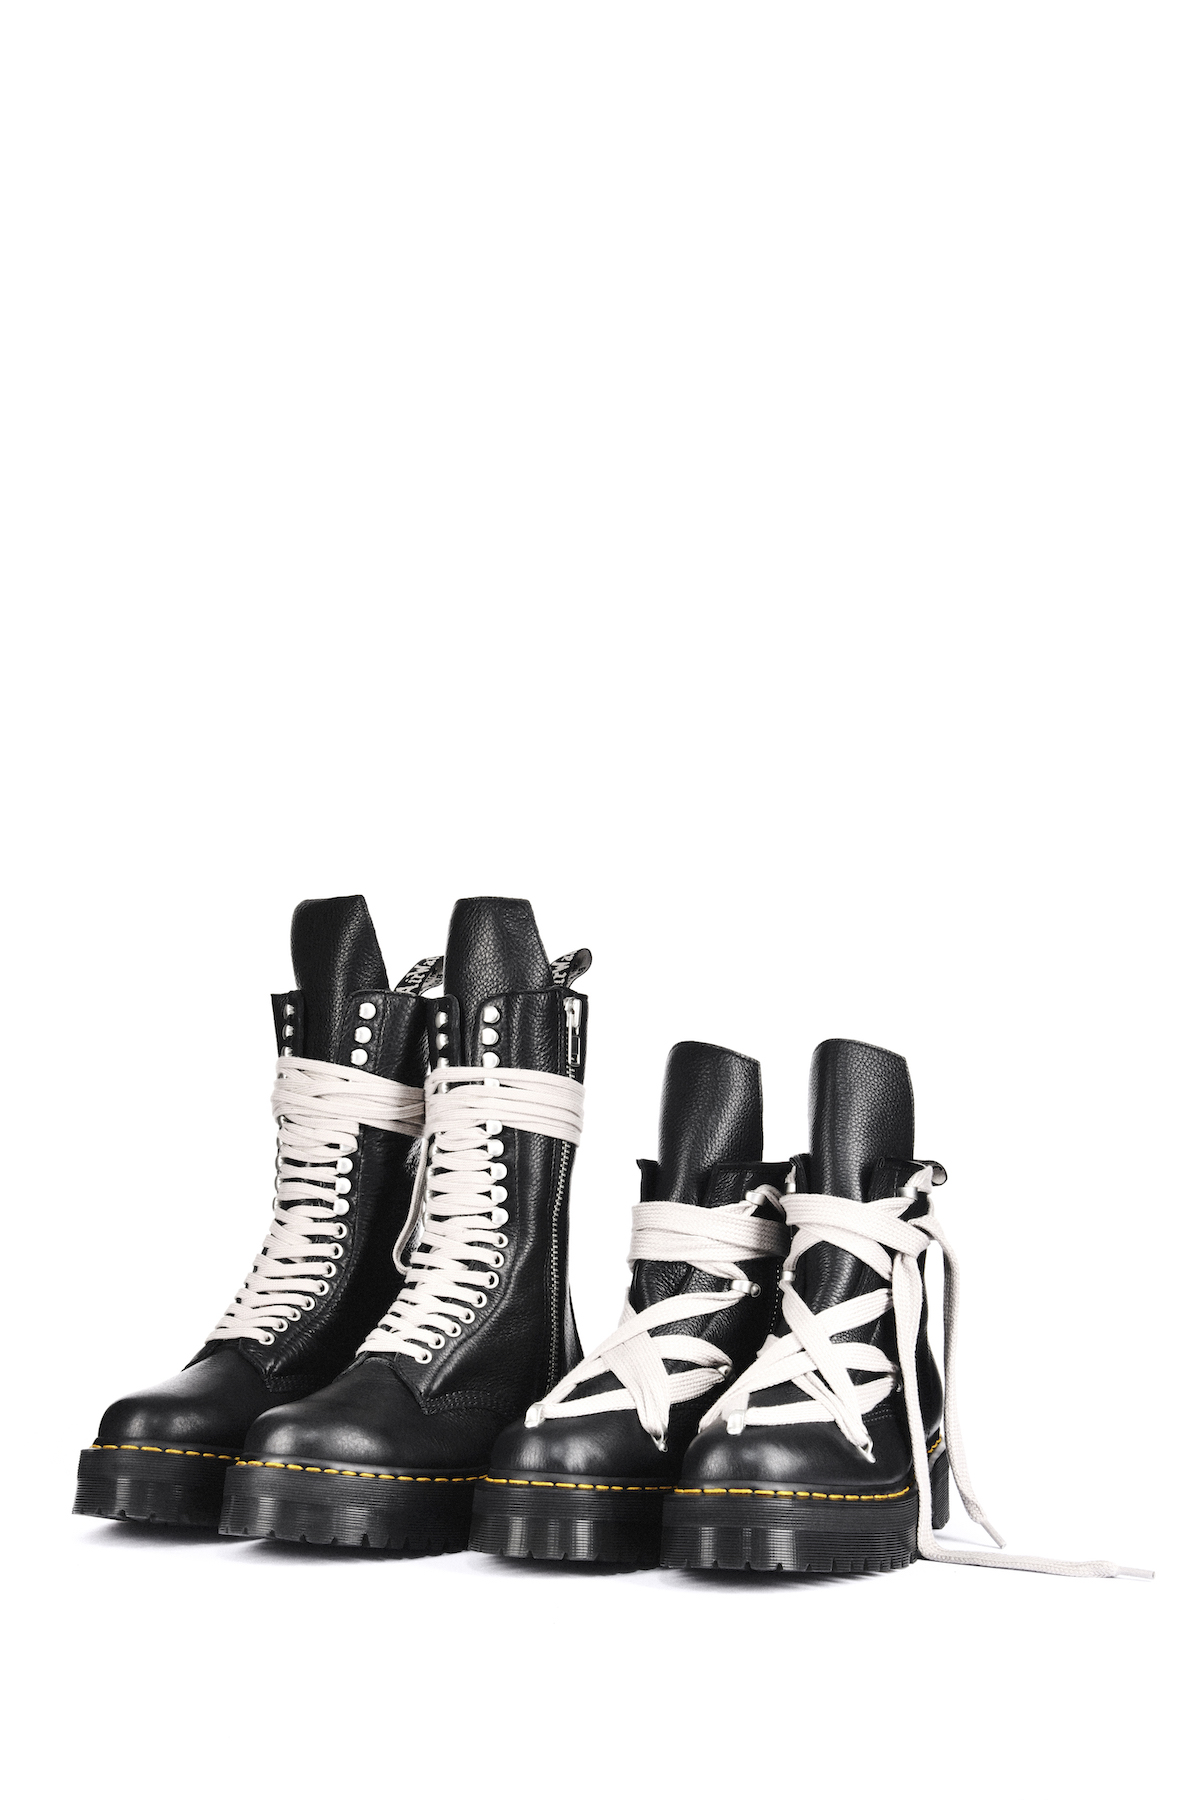 Dr. Martens and Rick Owens Join Forces for Another Collaboration ...